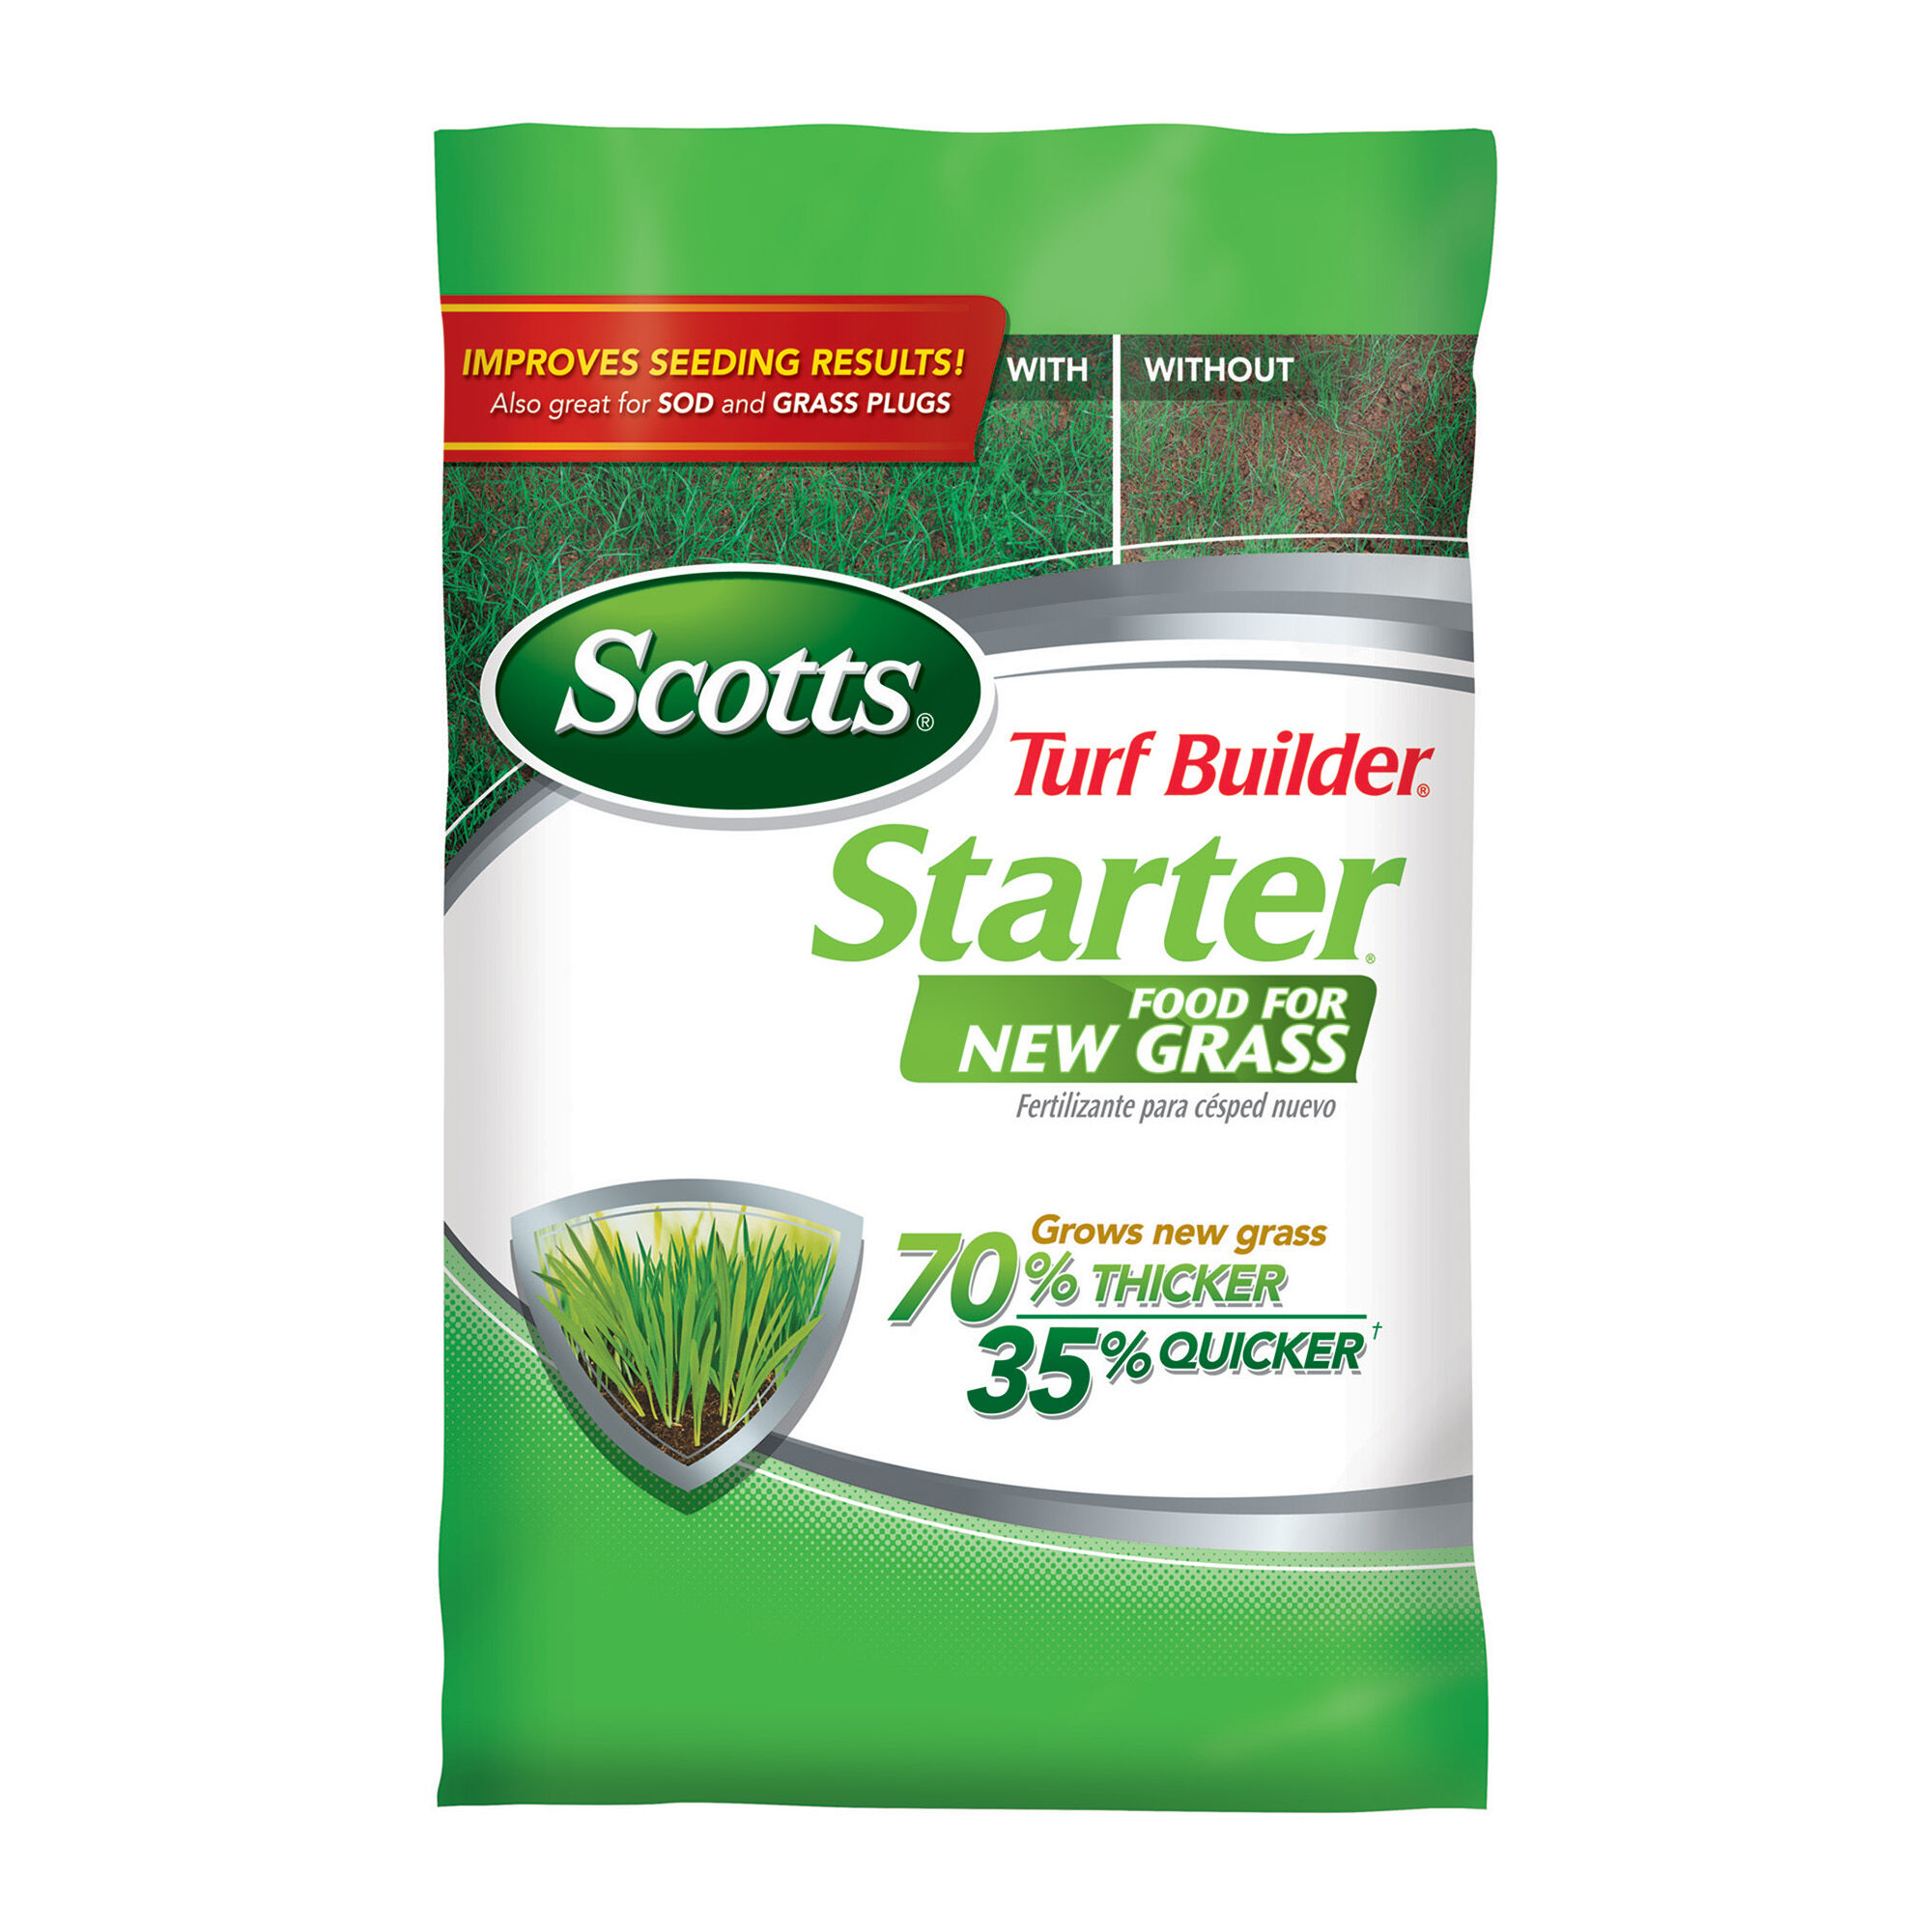 Image of Lawn Starter Turf Builder Grass Seed image